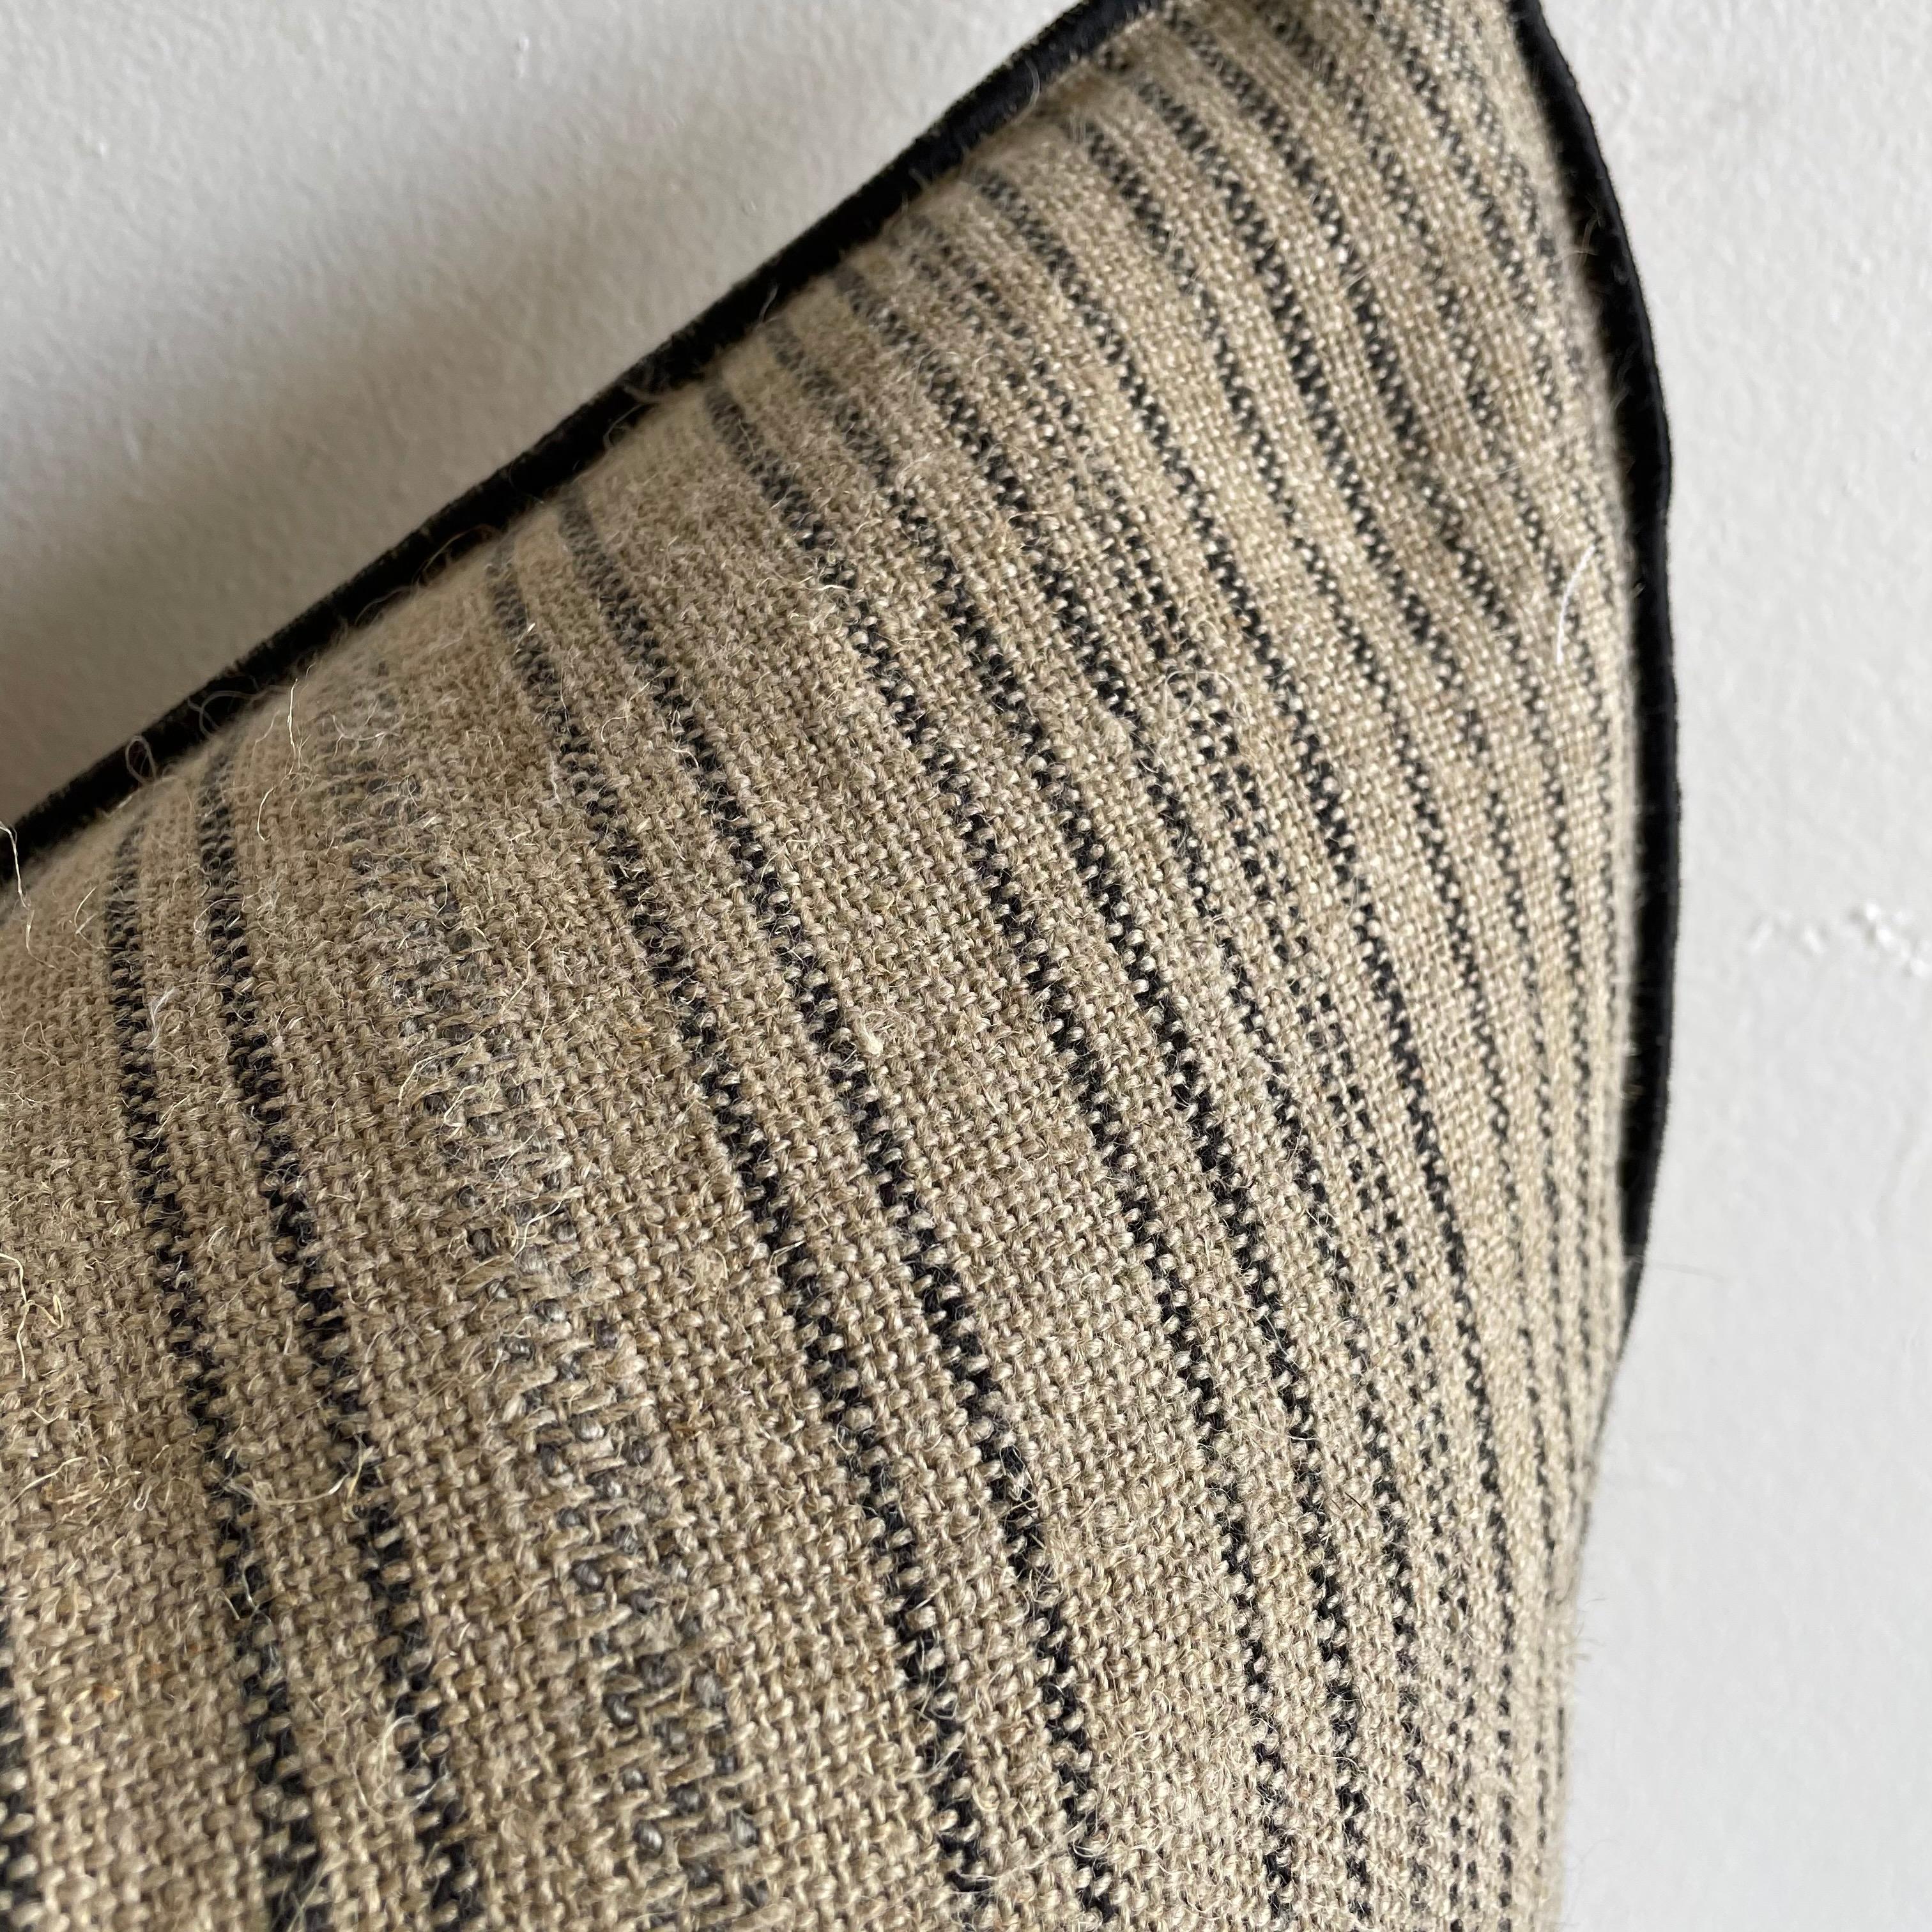 Custom linen blend accent pillow. Color: A black/ natural linen colored nubby textured style pillow with a stitched edge, metal zipper closure. Our pillows are constructed with vintage one of a kind textiles from around the globe. If this item is